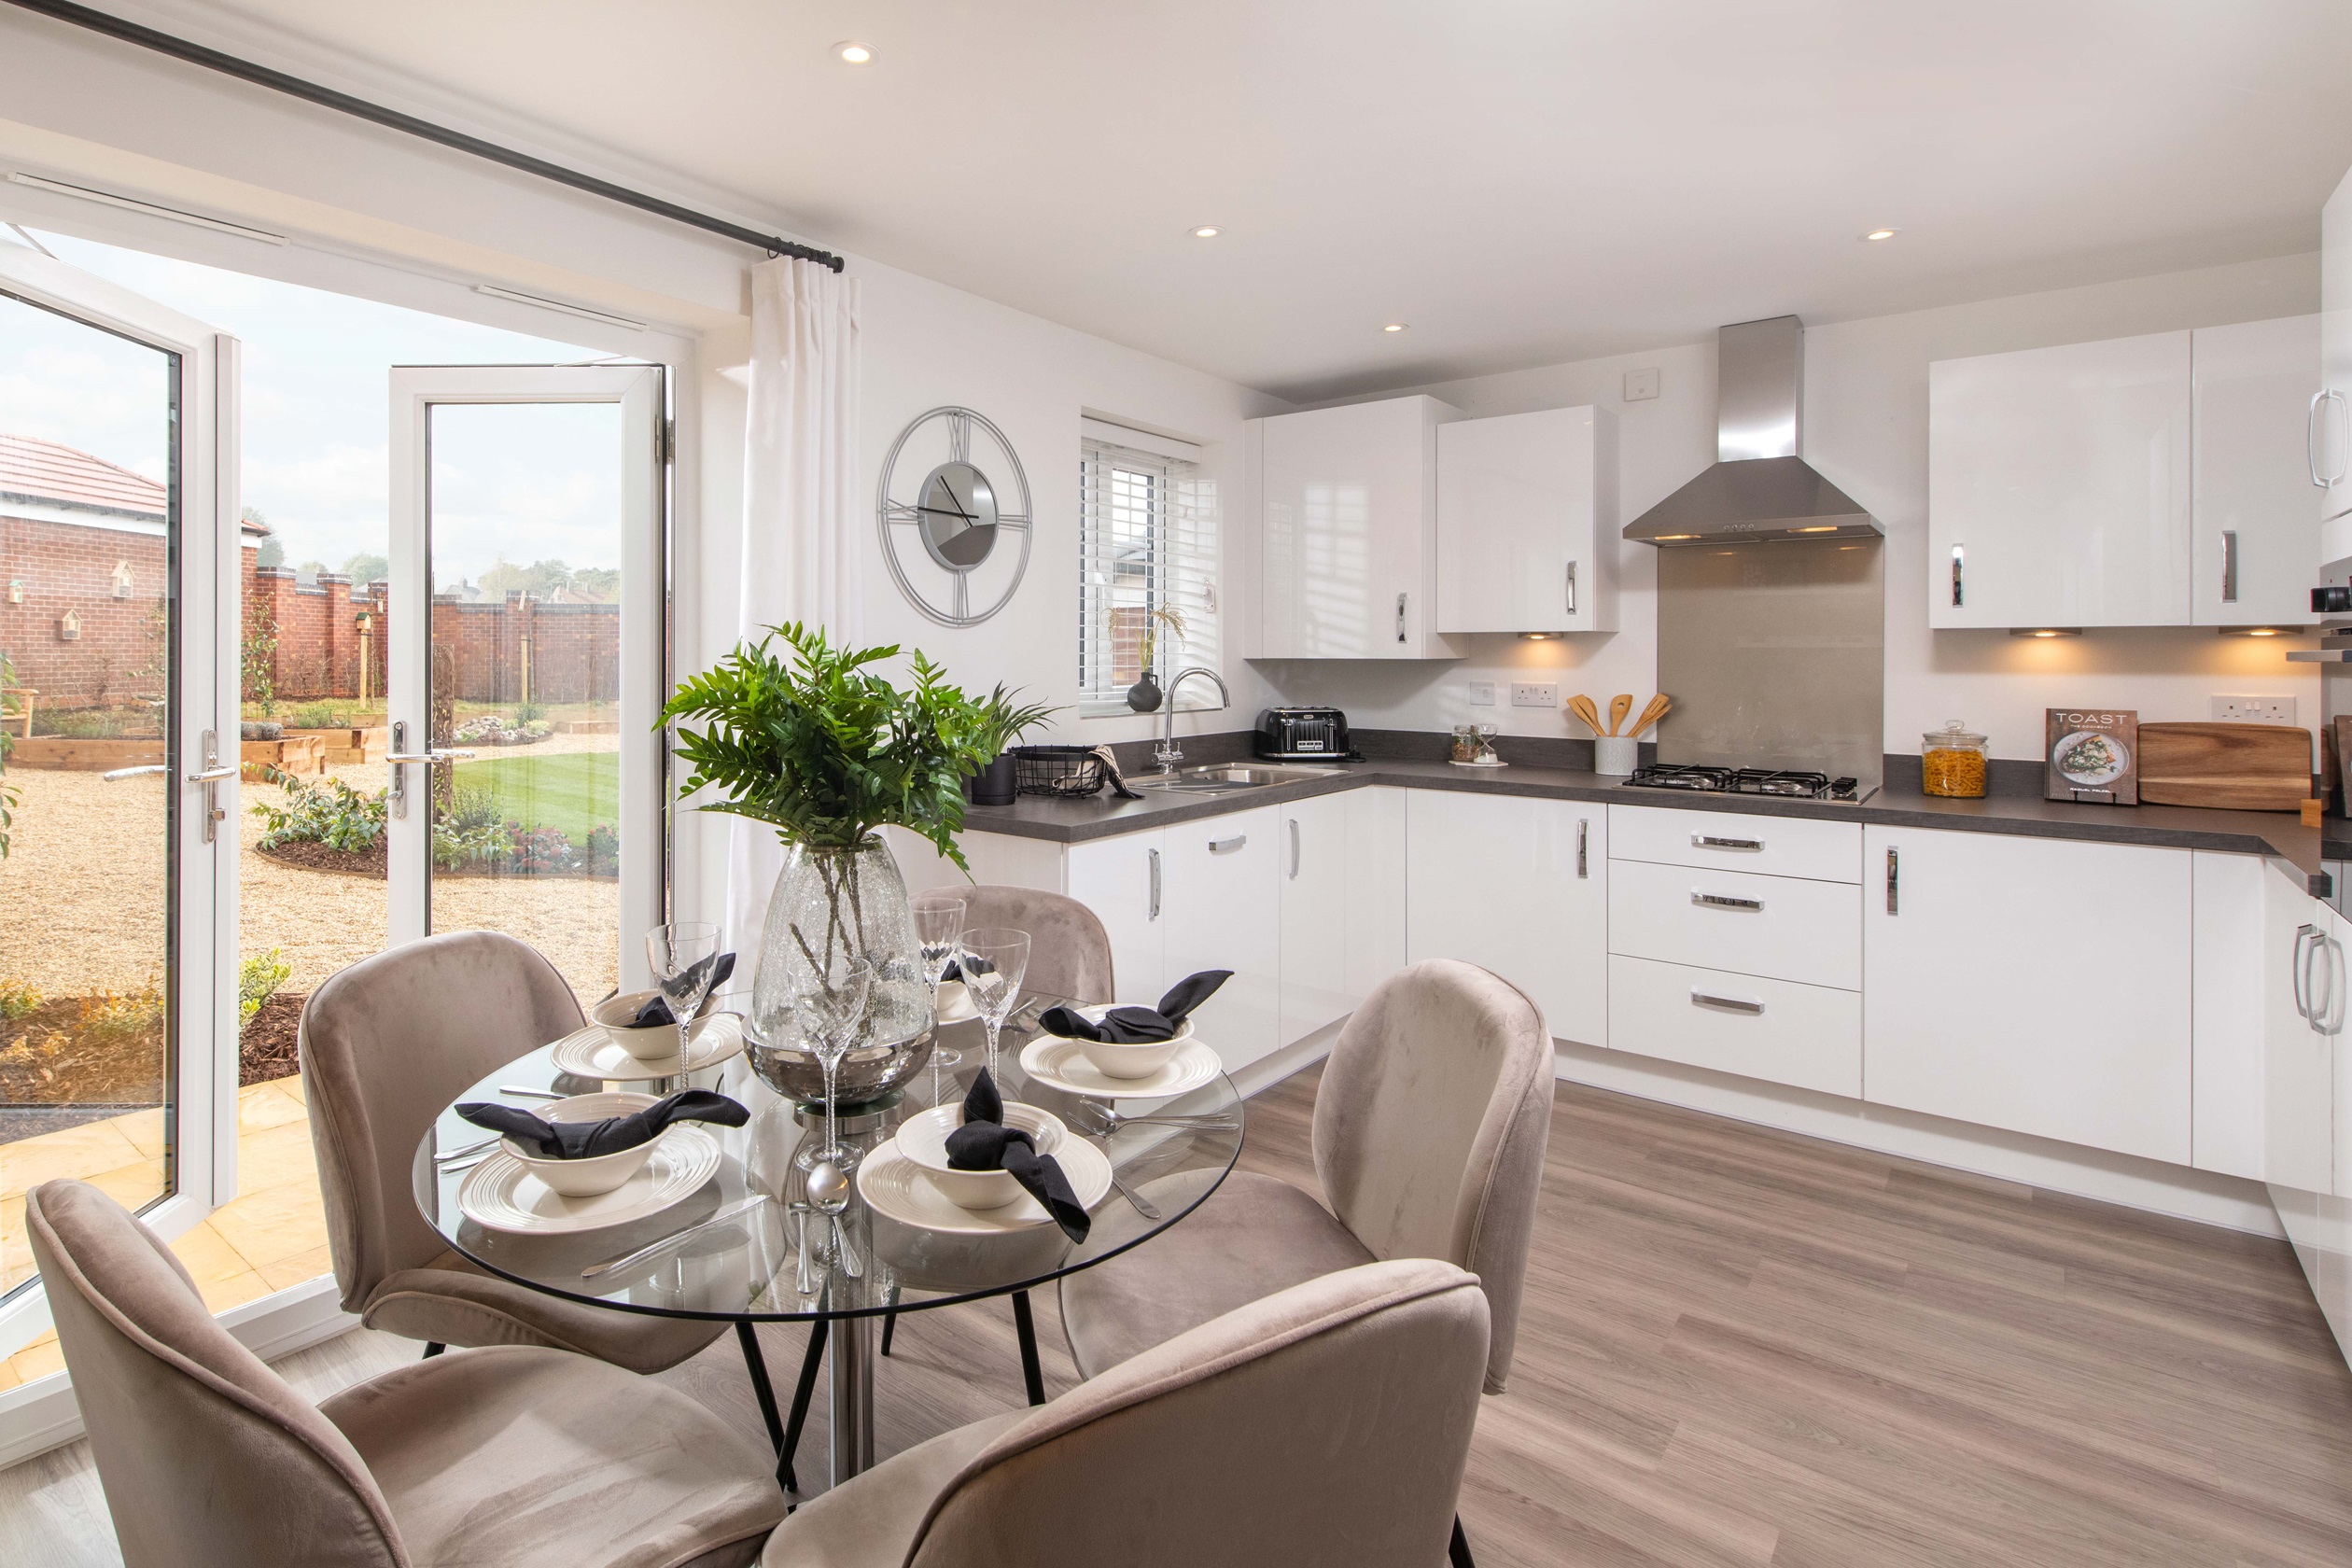 Property 2 of 10. Dwh Kennett Kitchen-Diner With French Doors